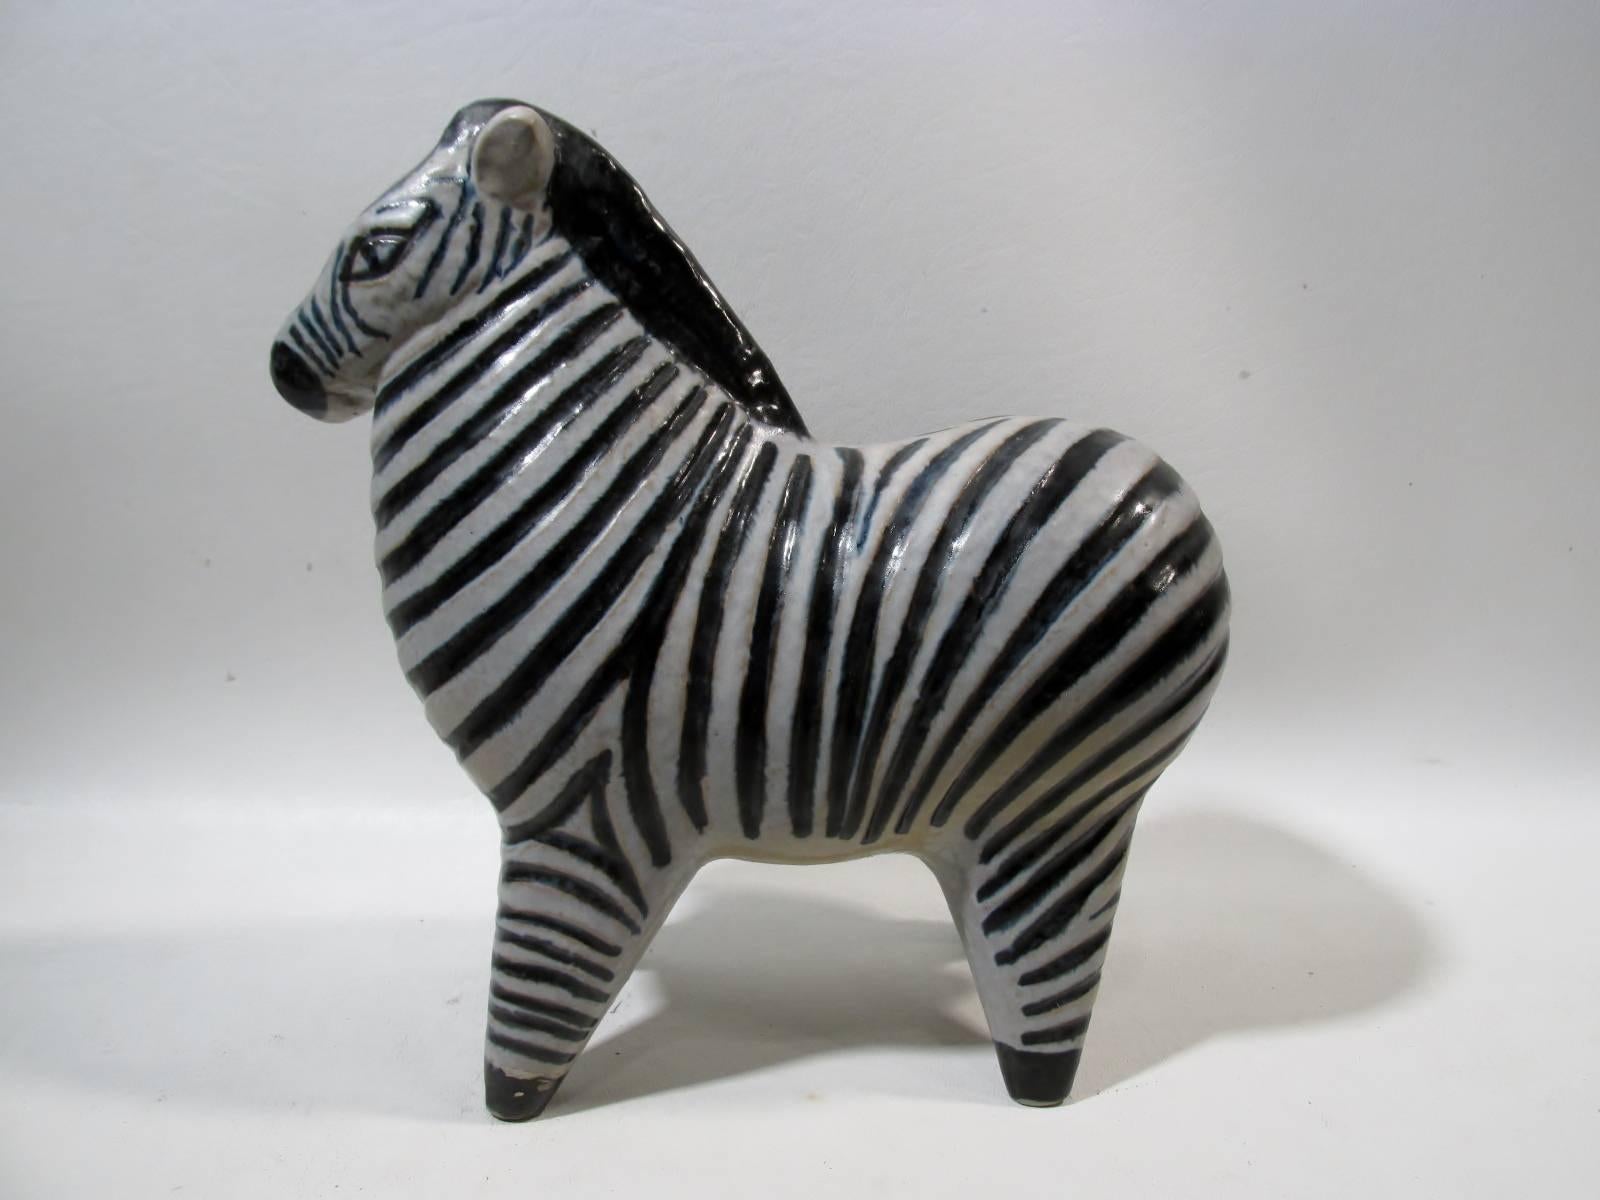 Modernist art pottery large “Stora Zoo” zebra figure designed by Lisa Larson for Gustavsberg Sweden in 1957. Retains original paper label to underside. 

Approximately 9” tall and 9” long.